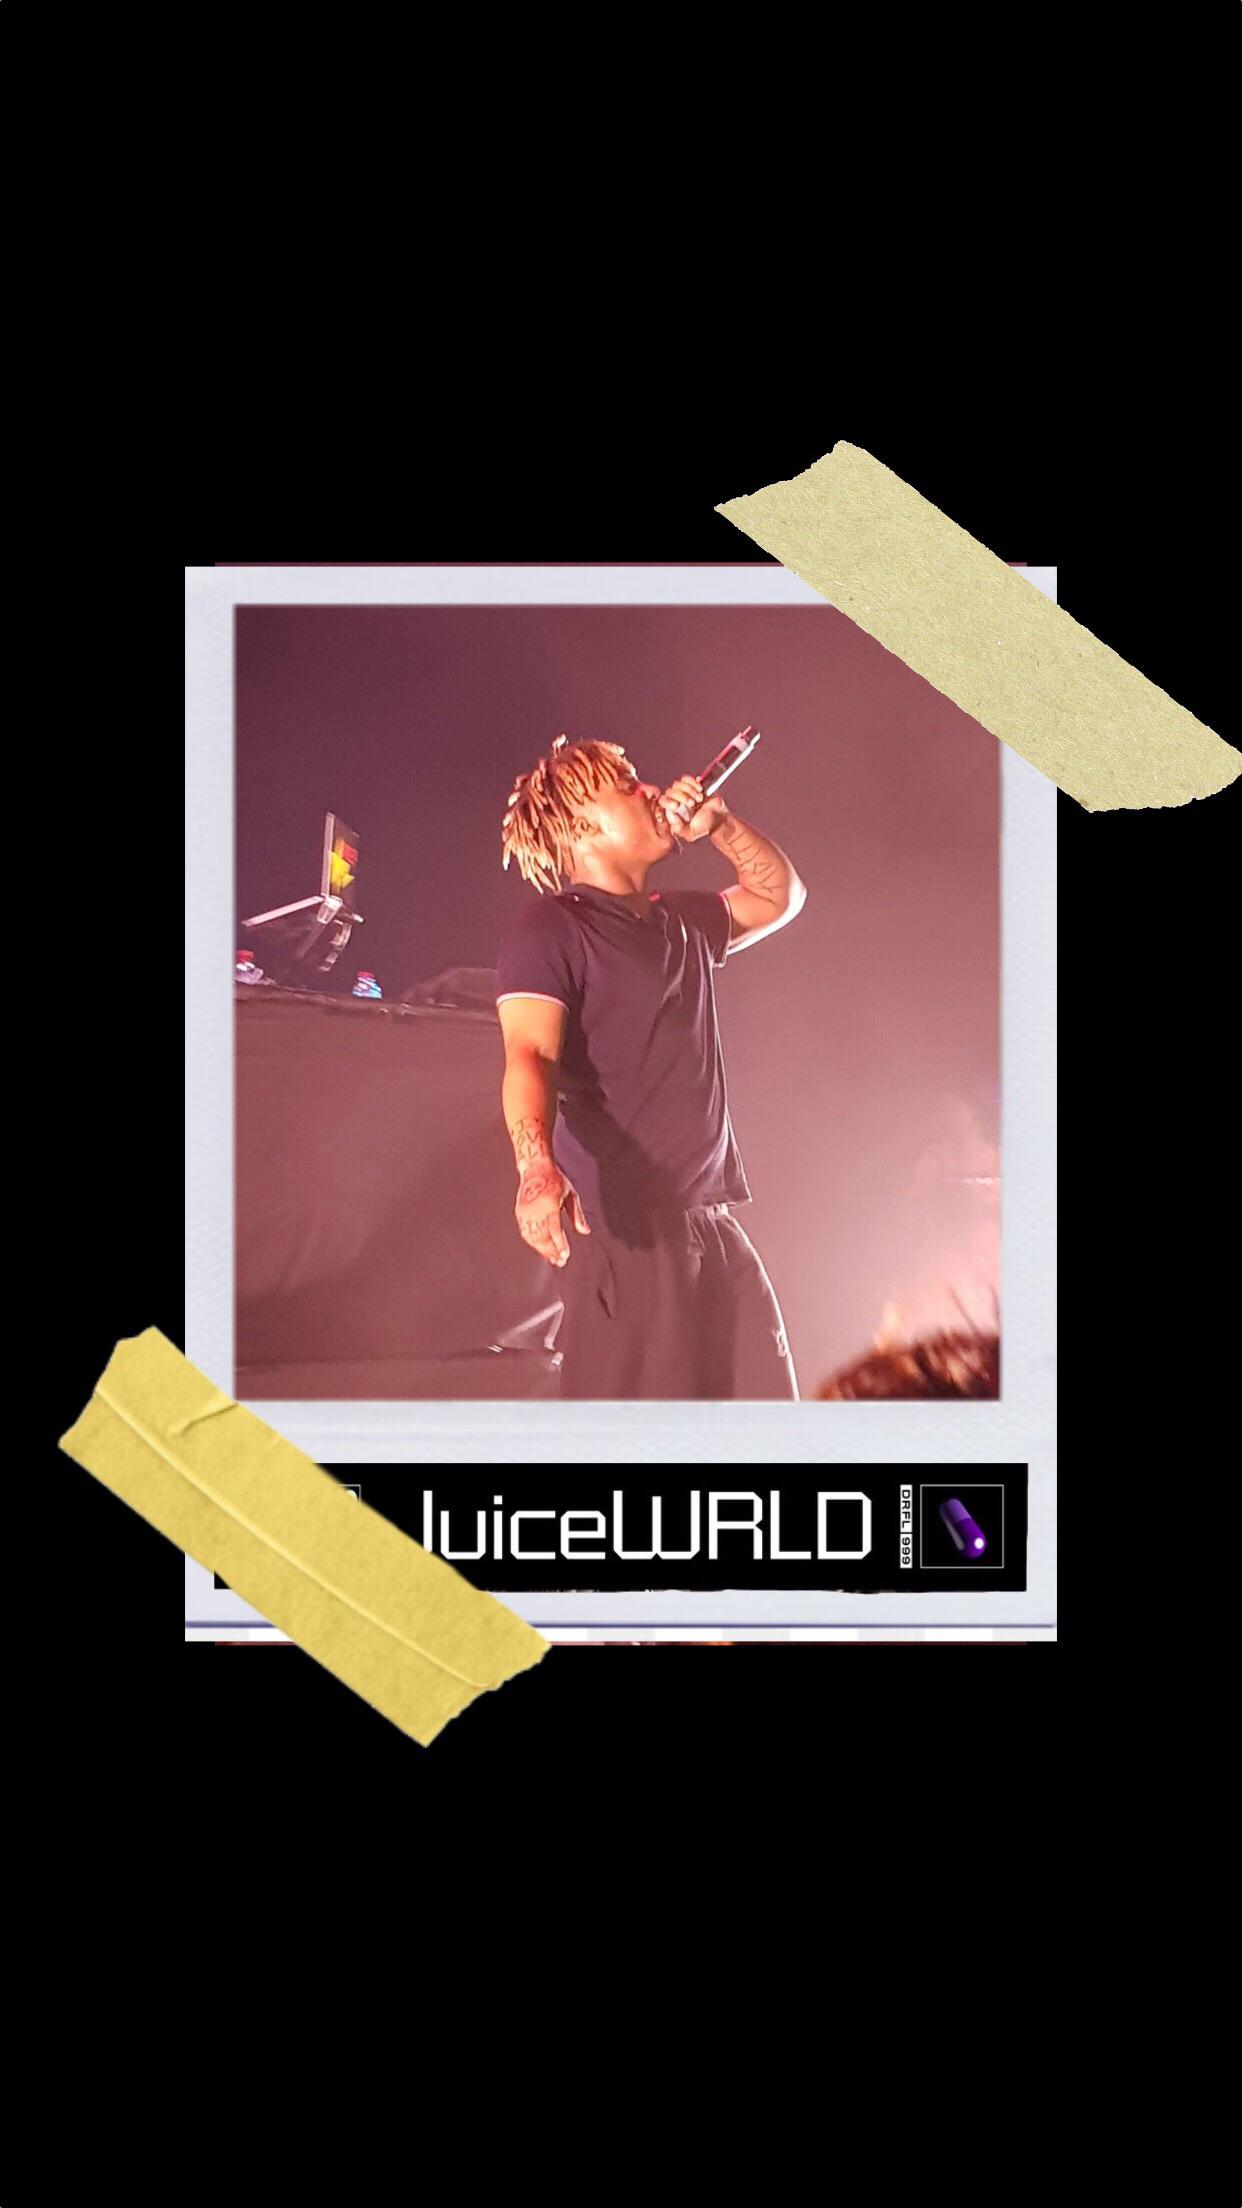 Juice WRLD wallpaper I made for iPhone and Android JuiceWRLD 1242x2208